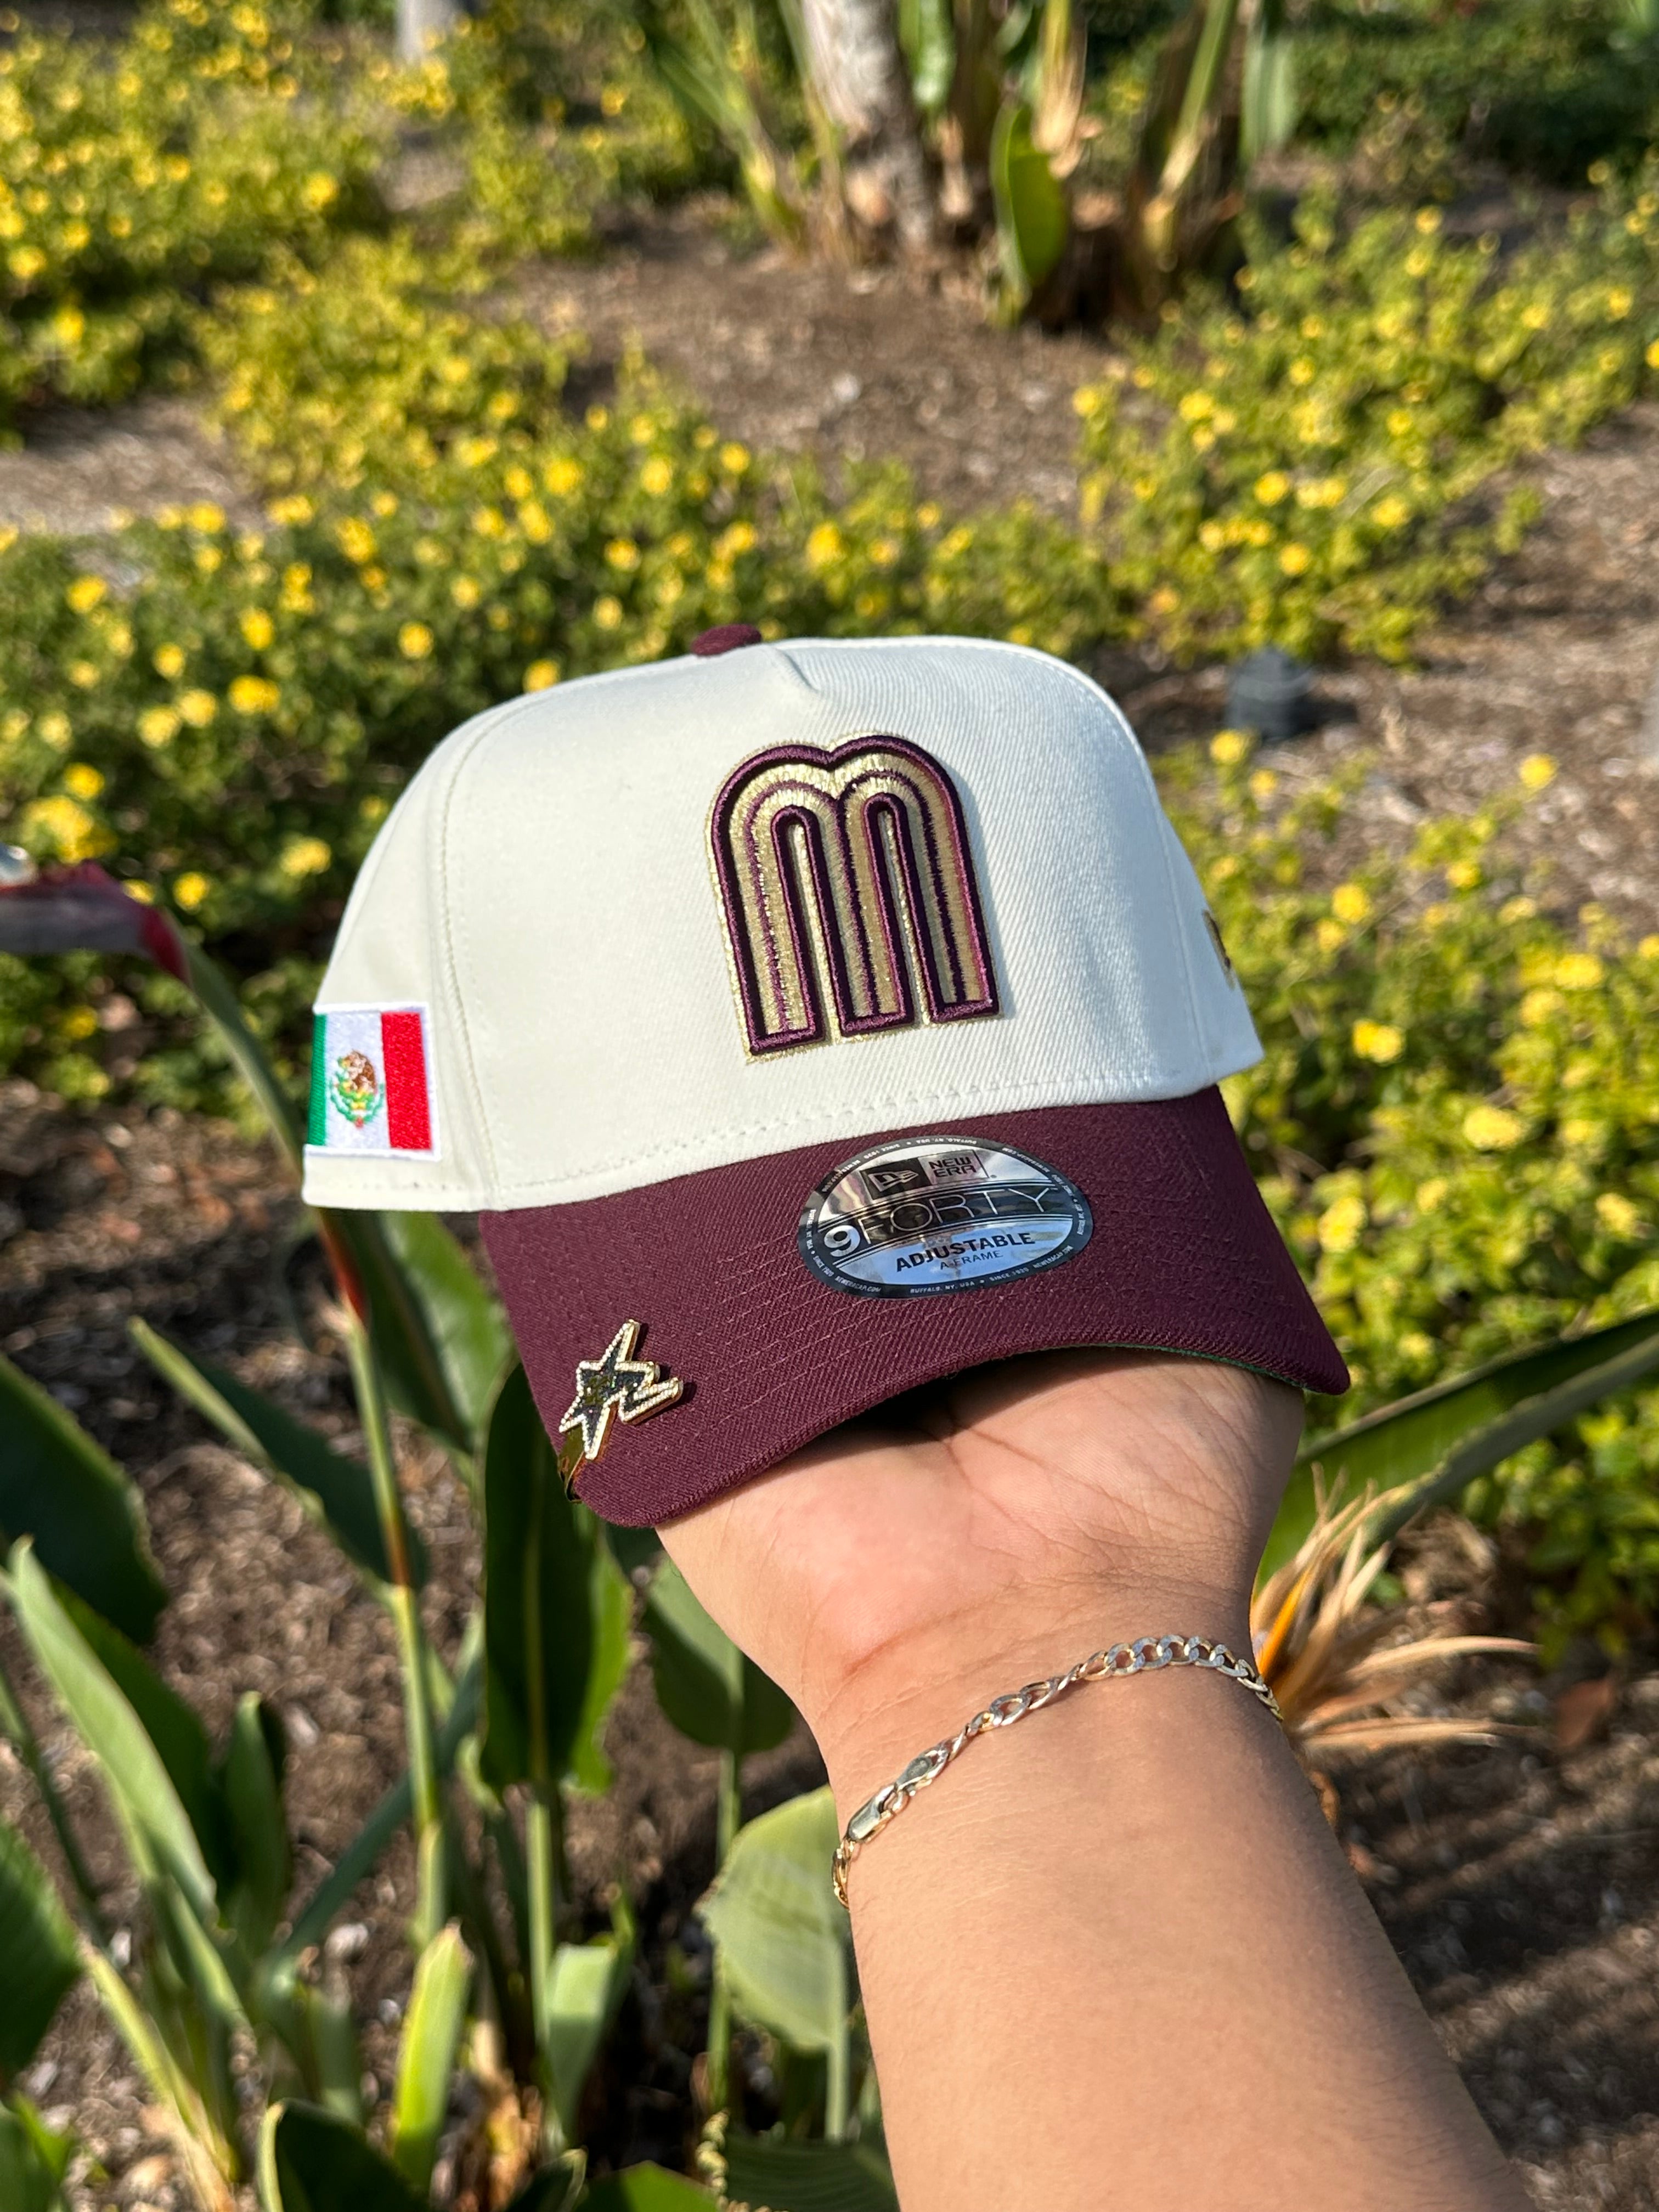 NEW ERA EXCLUSIVE 9FORTY CHROME WHITE/BURGUNDY MEXICO A-FRAME ADJUSTABLE W/ MEXICO FLAG SIDE PATCH